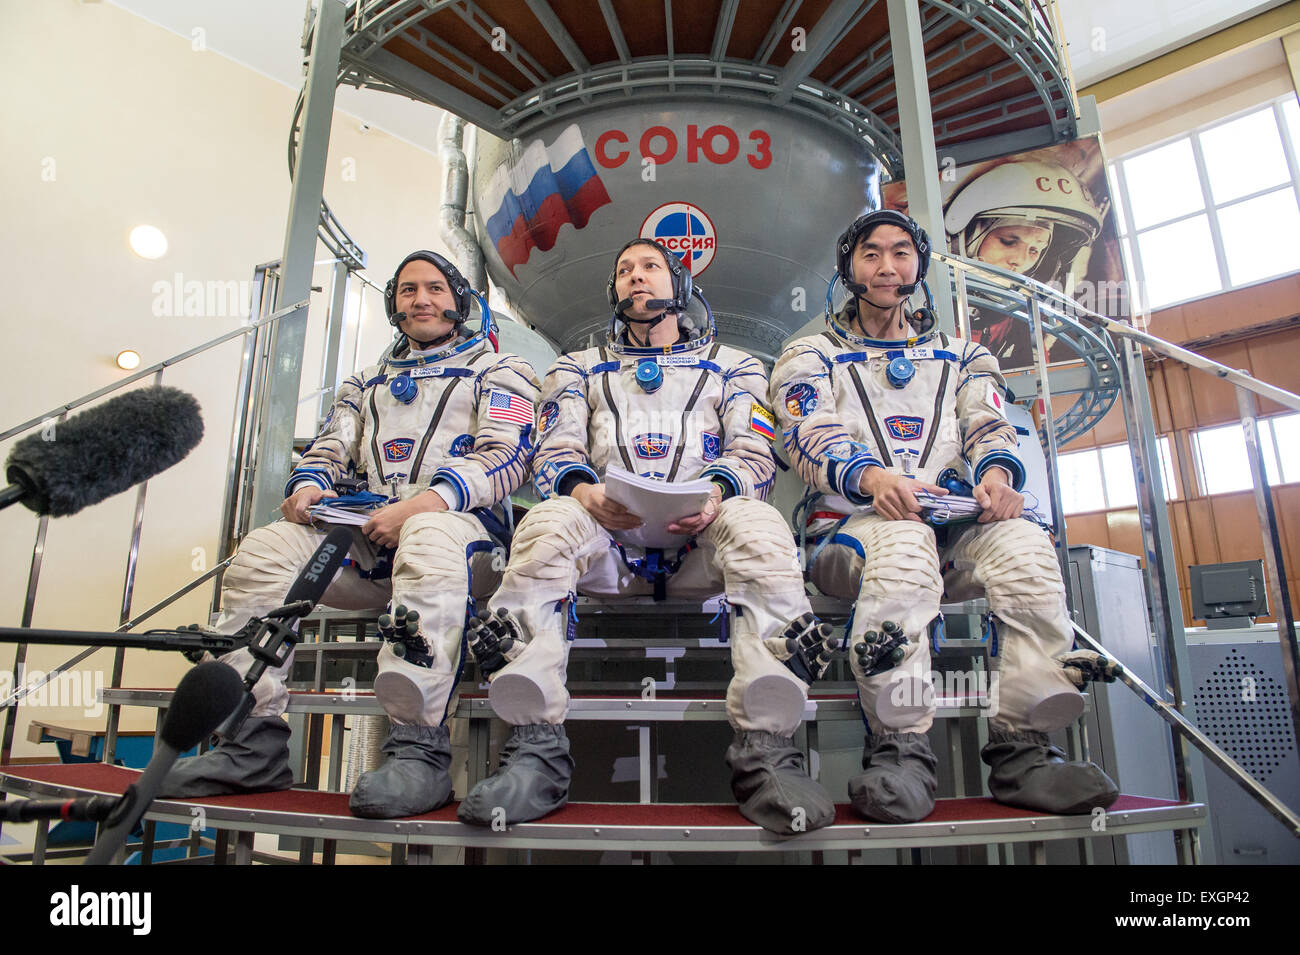 NASA astronaut Kjell Lindgren, left, Russian cosmonaut Oleg Kononenko, center, and Japan Aerospace Exploration Agency astronaut Kimiya Yui participate in the second day of qualification exams, Thursday, May 7, 2015 at the Gagarin Cosmonaut Training Center (GCTC) in Star City, Russia. The Expedition 44/45 trio is preparing for launch to the International Space Station in their Soyuz TMA-17M spacecraft from the Baikonur Cosmodrome in Kazakhstan. Stock Photo